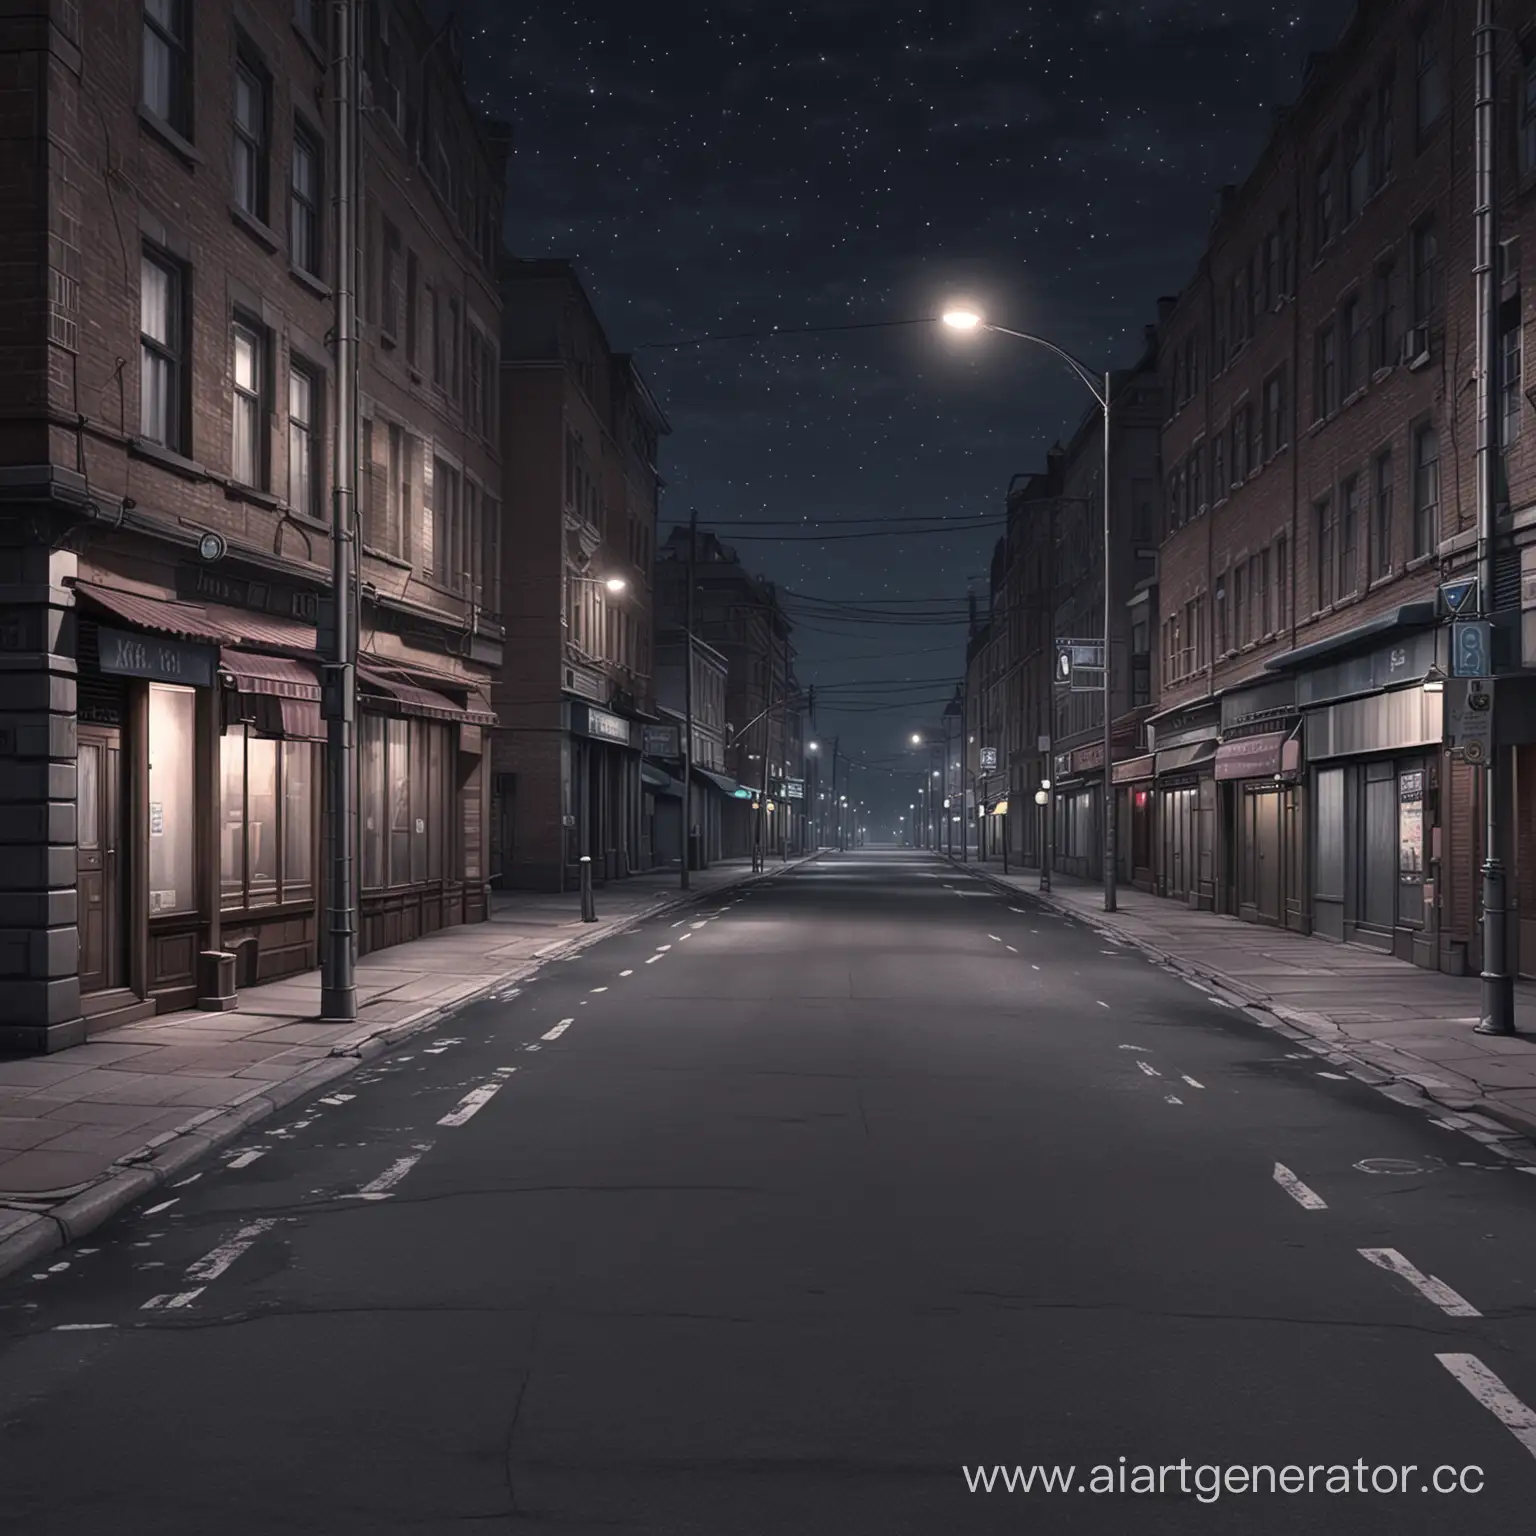 Background for a visual novel.  City street at night without lights